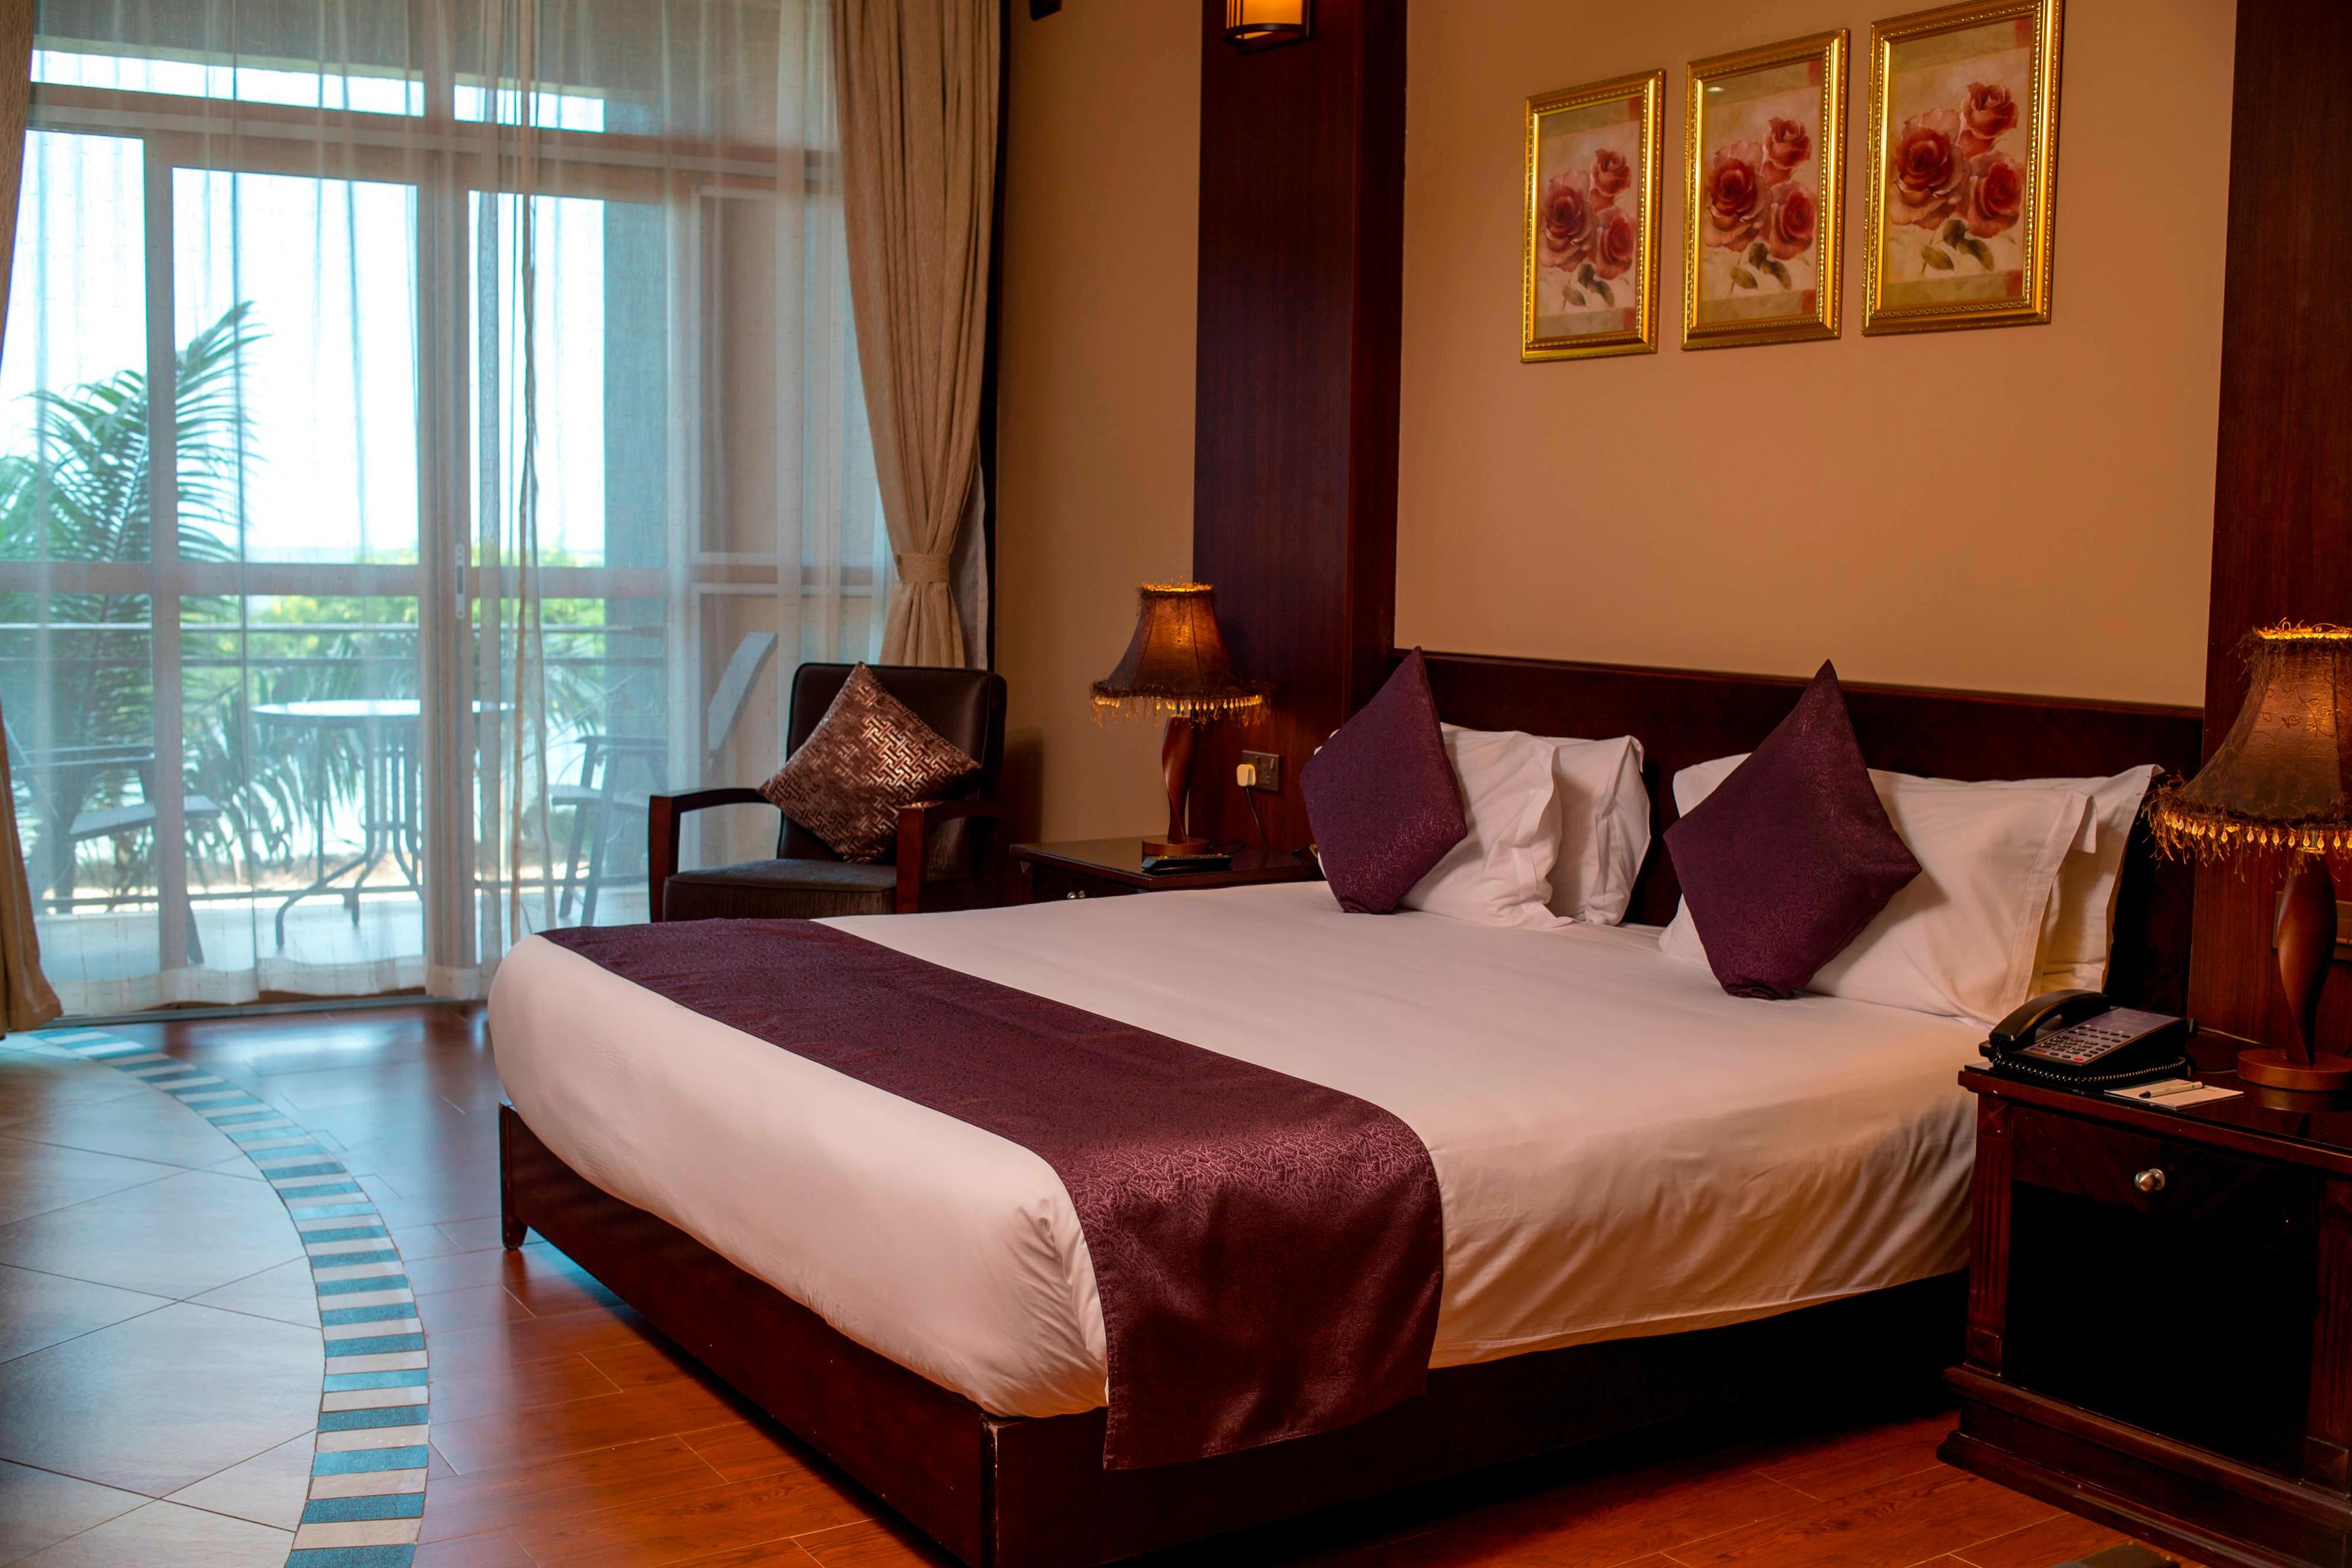 Enjoy spectacular views of Lake Victoria from the 1 Queen Guest Room with a balcony.